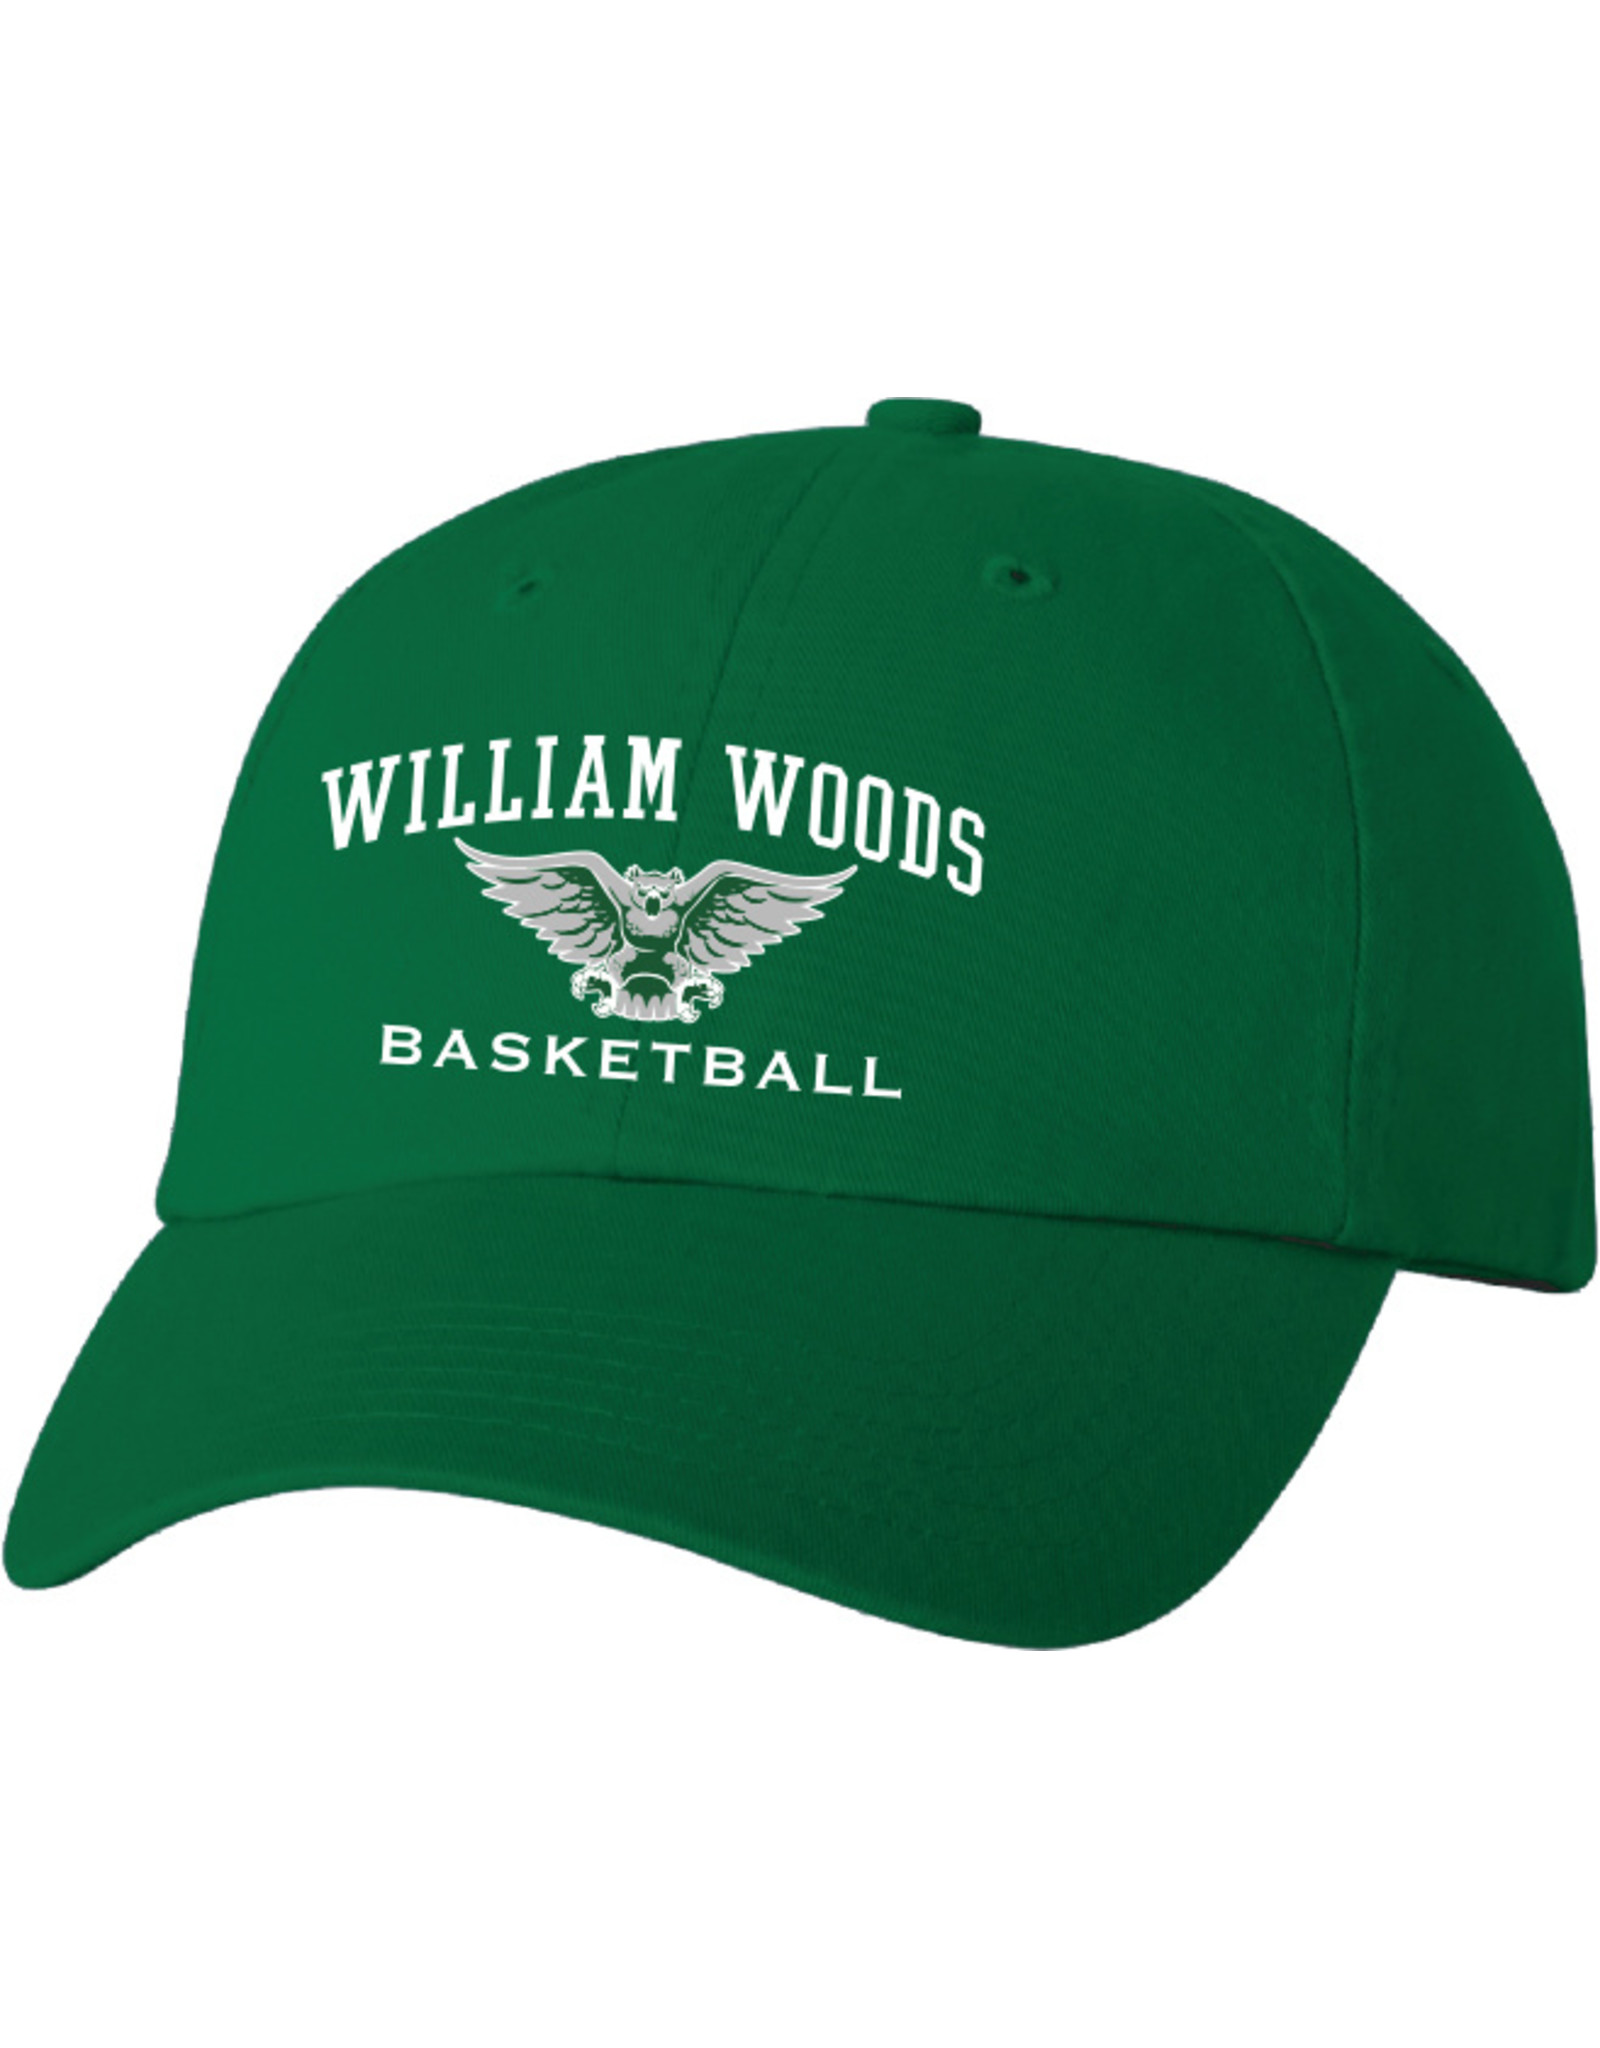 College House Forest twill hat-Basketball